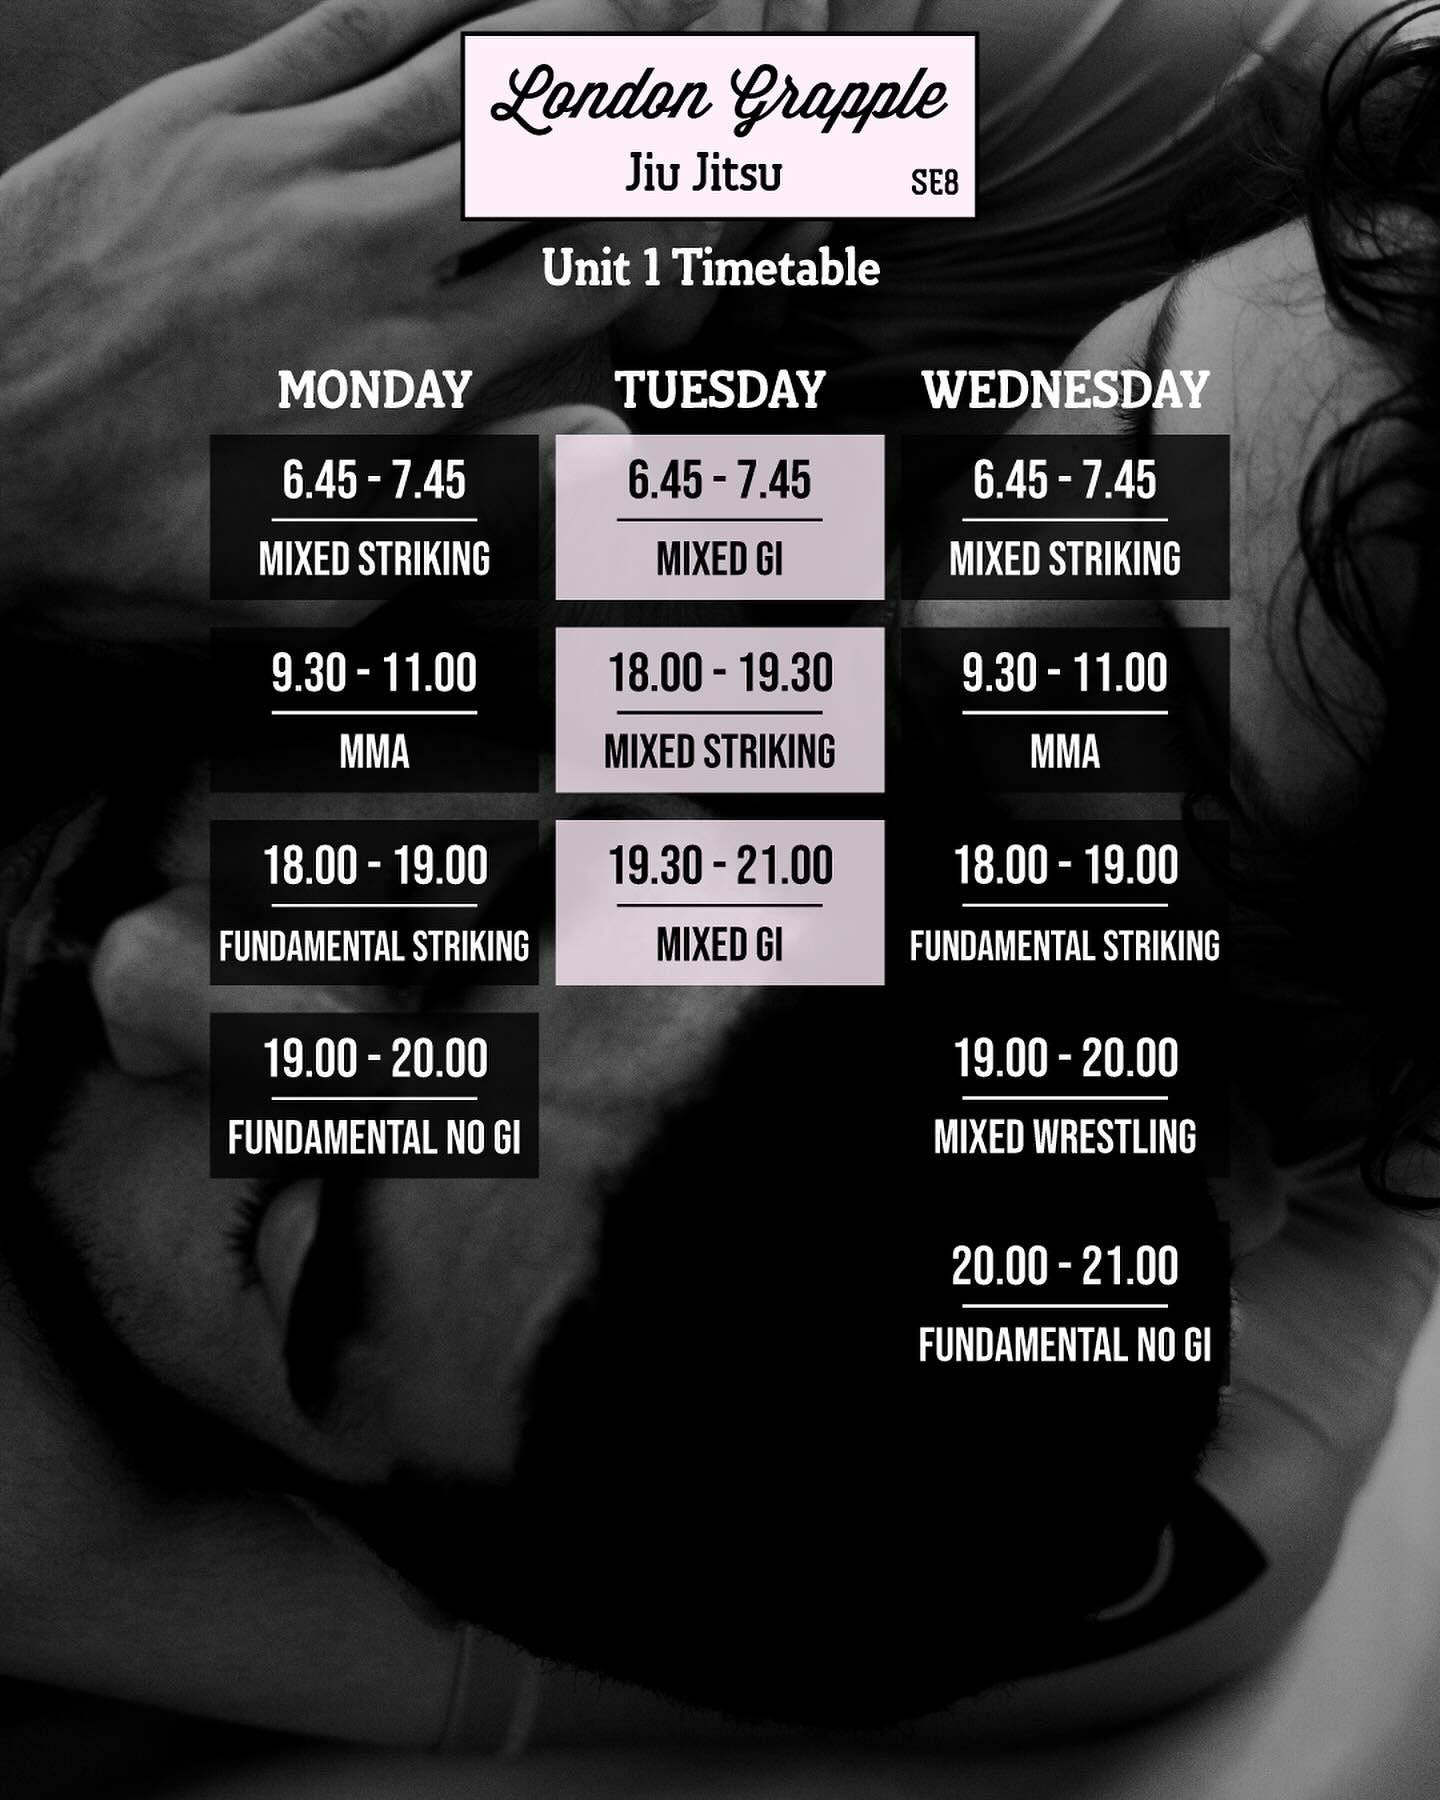 Unit 1 (Mat 2) Timetable❗️

New timetable is live from 07/05 🔥

#bjj #wrestling #mma #muaythai #grappling